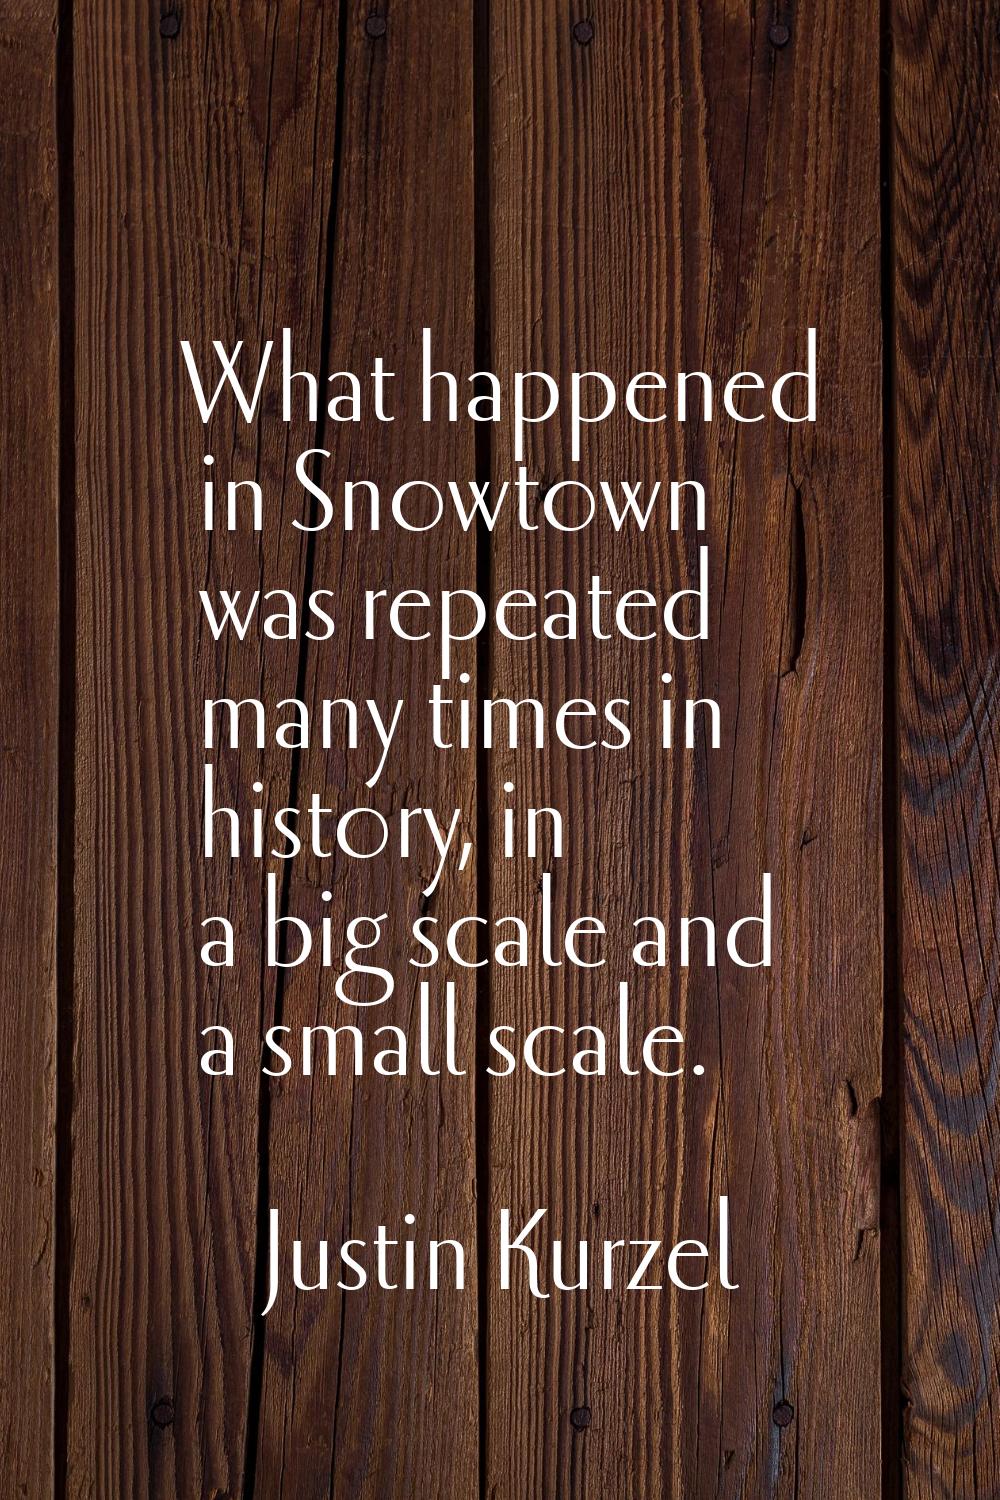 What happened in Snowtown was repeated many times in history, in a big scale and a small scale.